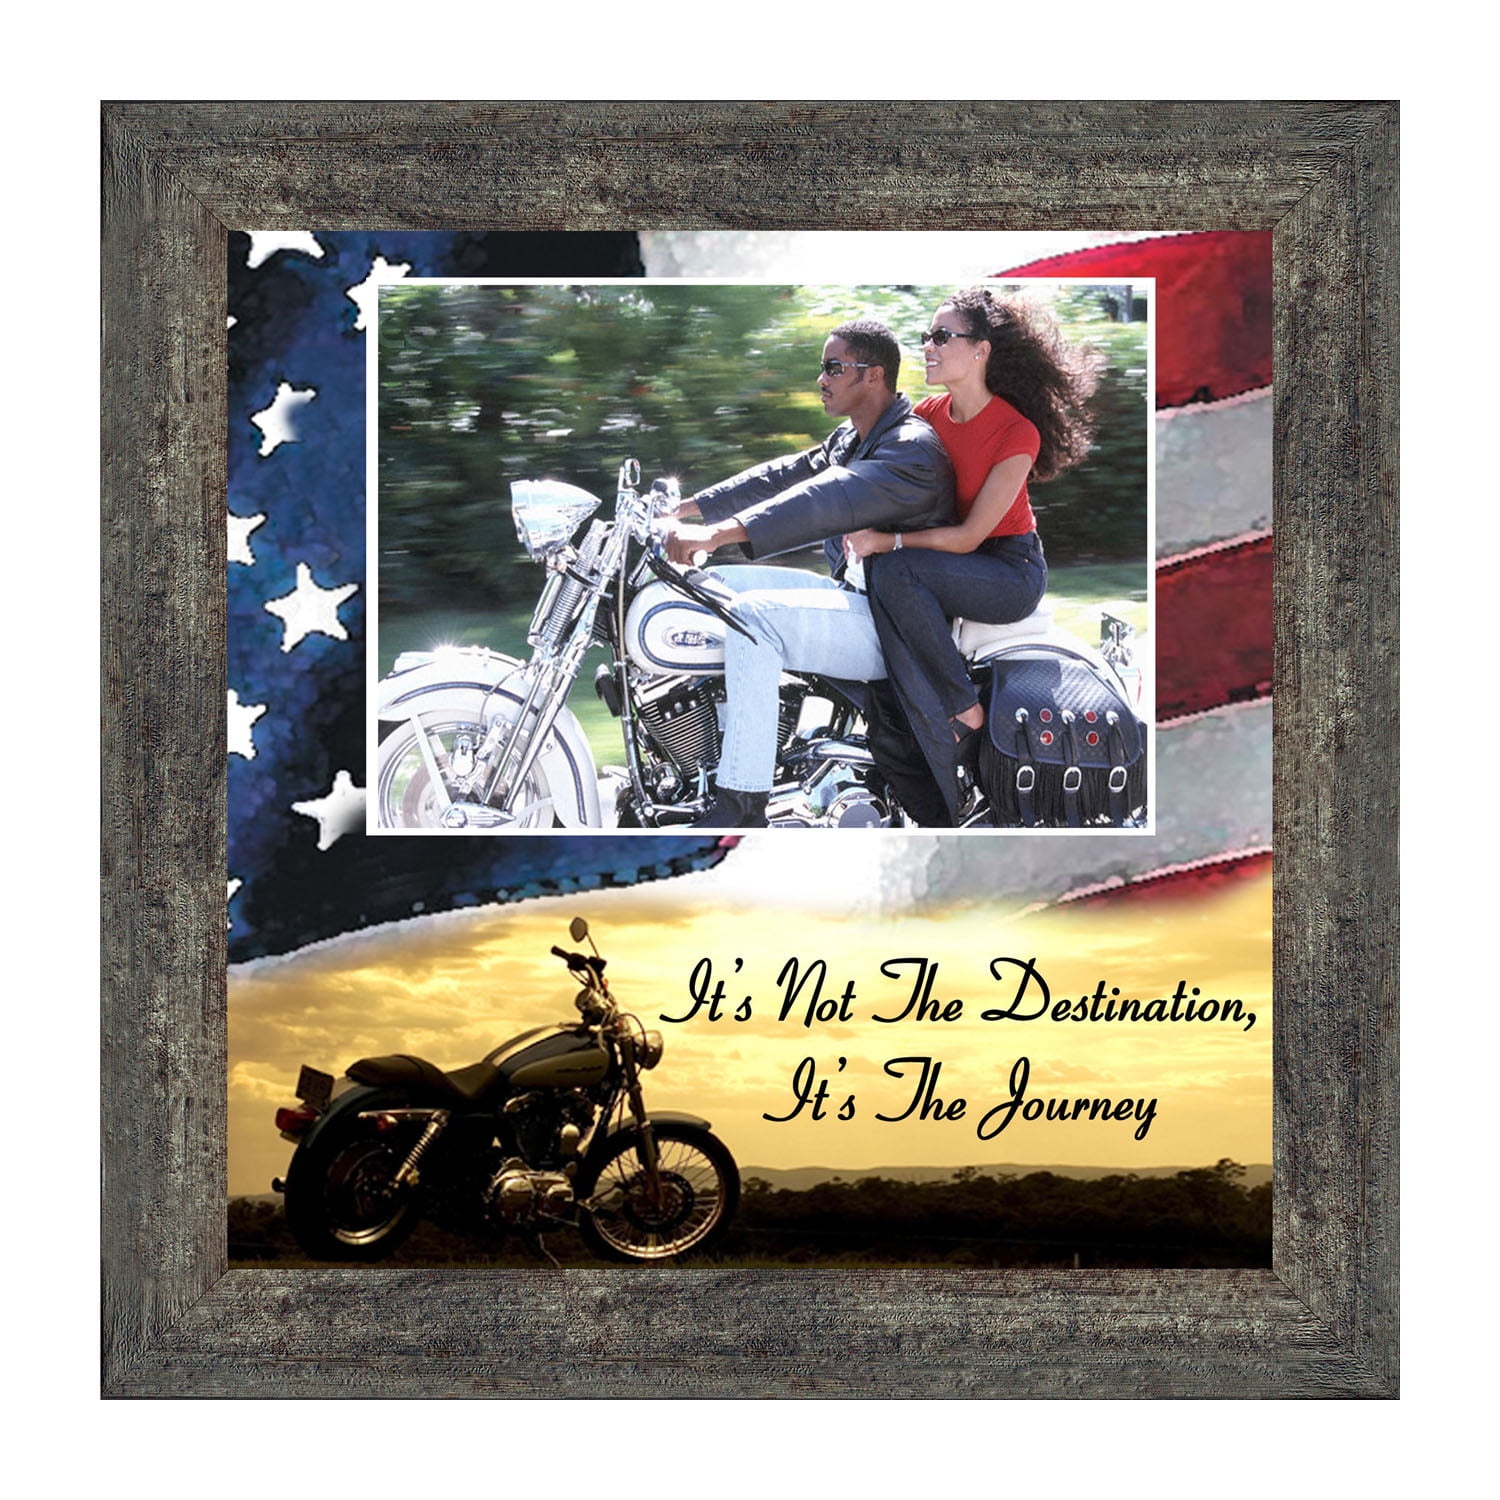 Harley Davidson Gifts for Men and Women, Patriotic Harley Accessories